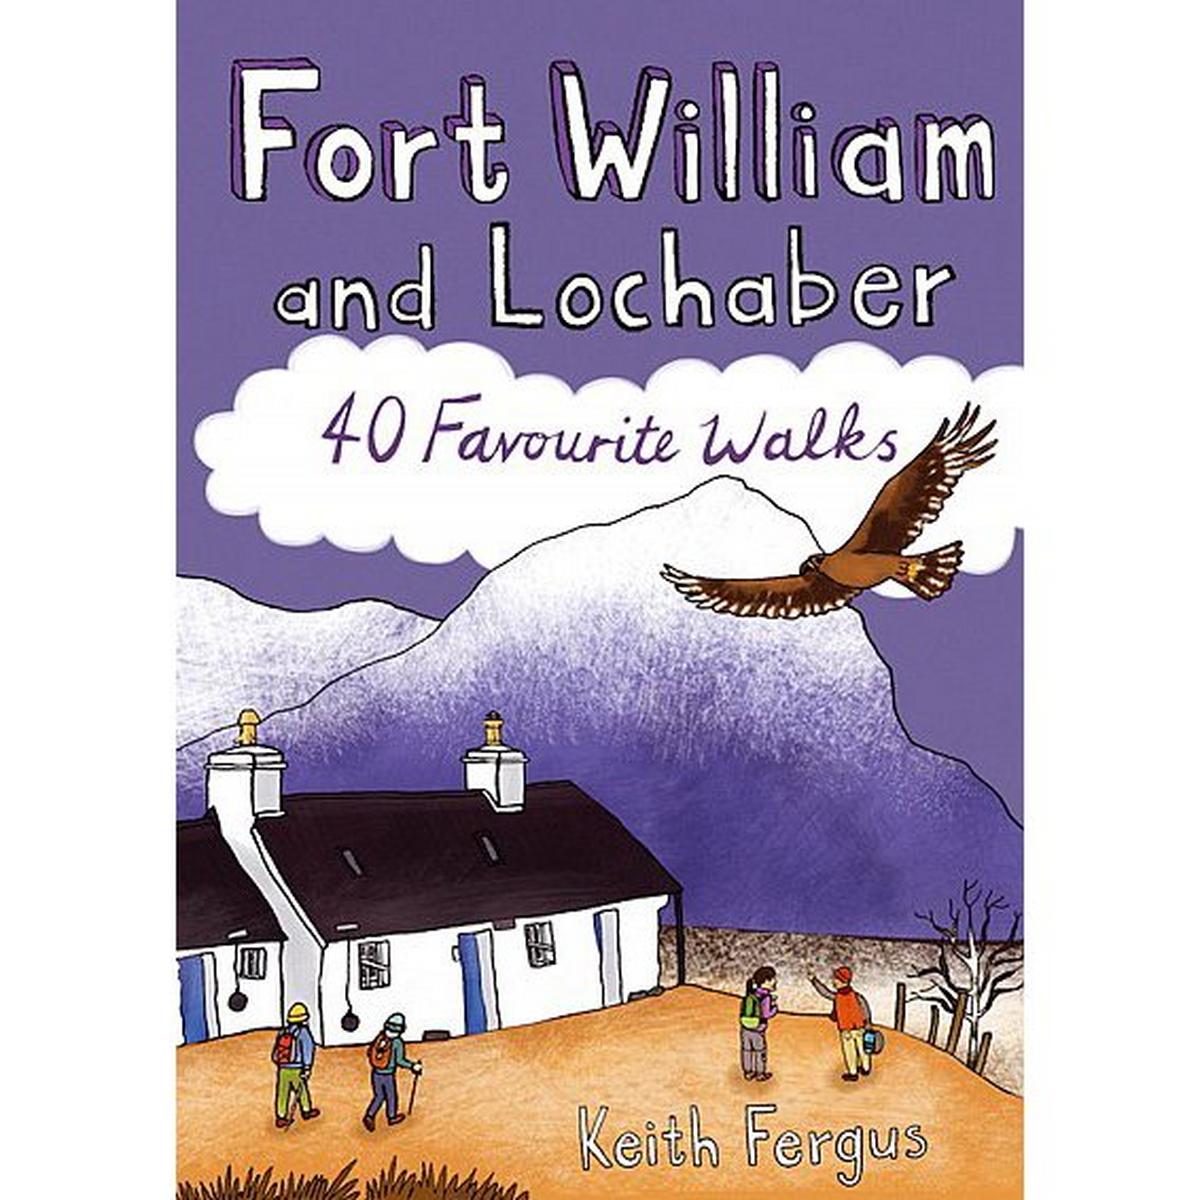 Cordee Fort William Pocket Mountain Guide